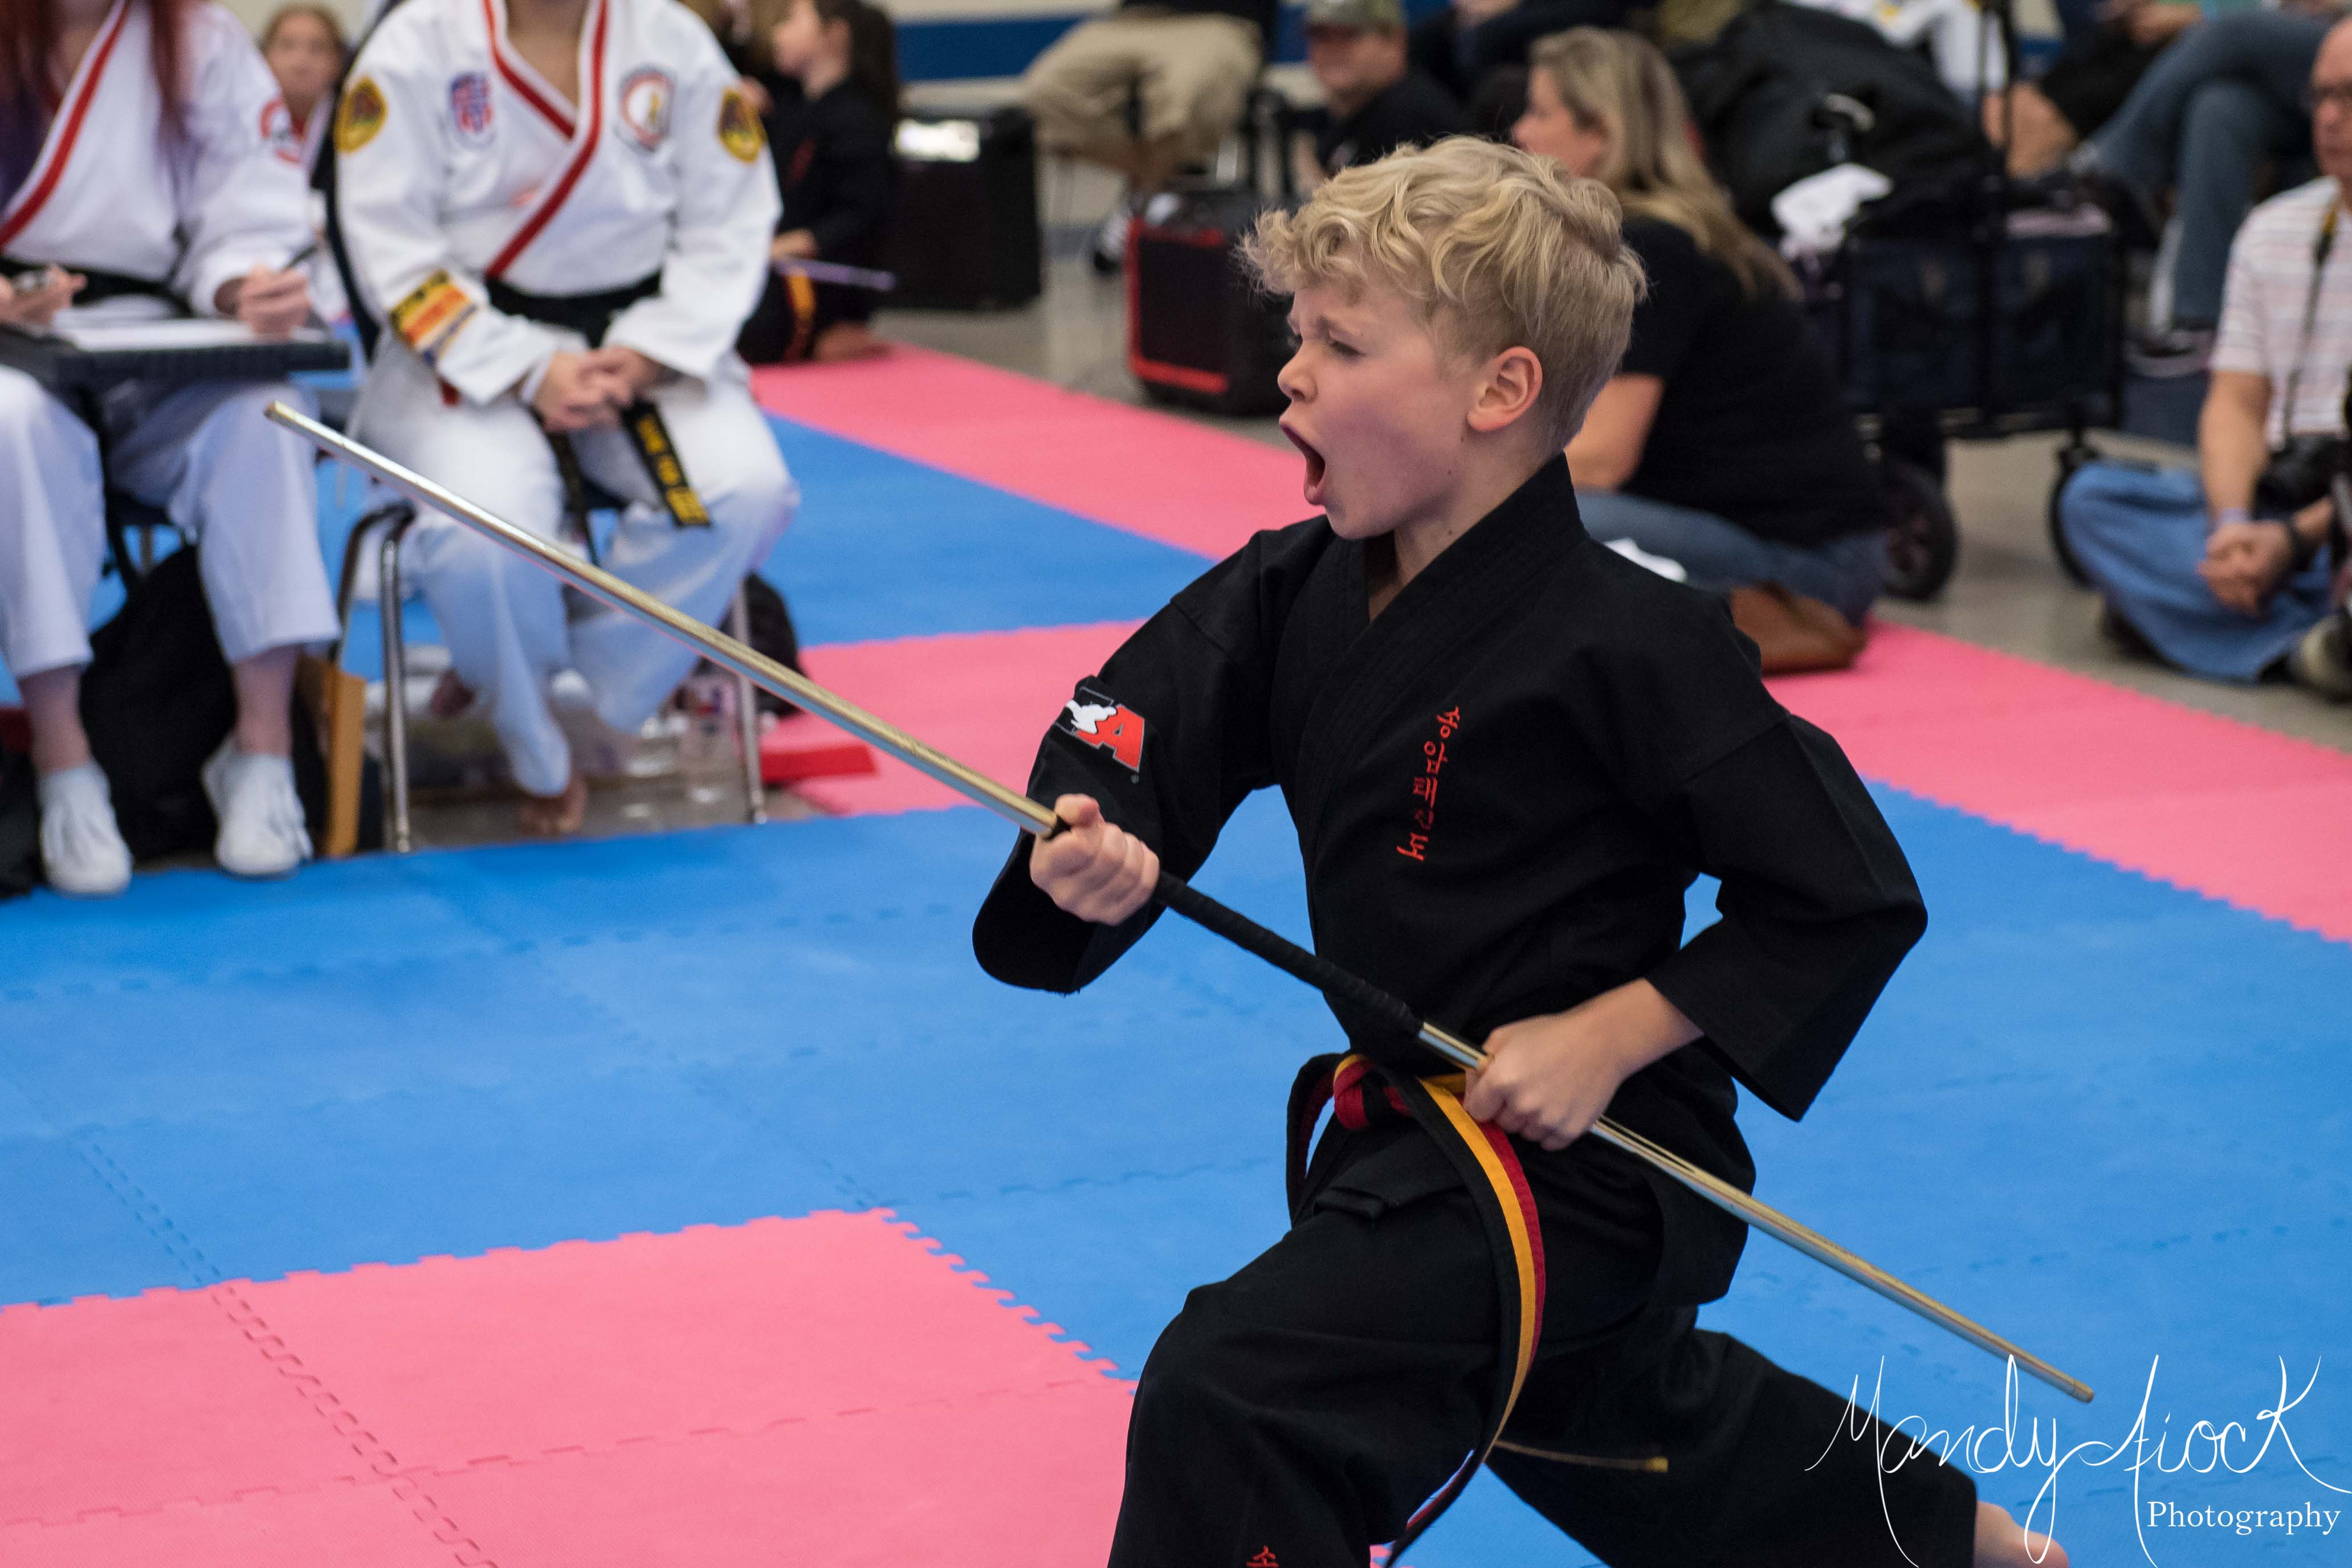 Photos from the Phoenix Rising ATA Martial Arts Tournament hosted by Sulphur Springs ATA Martial Arts! Photos by Mandy Fiock Photography